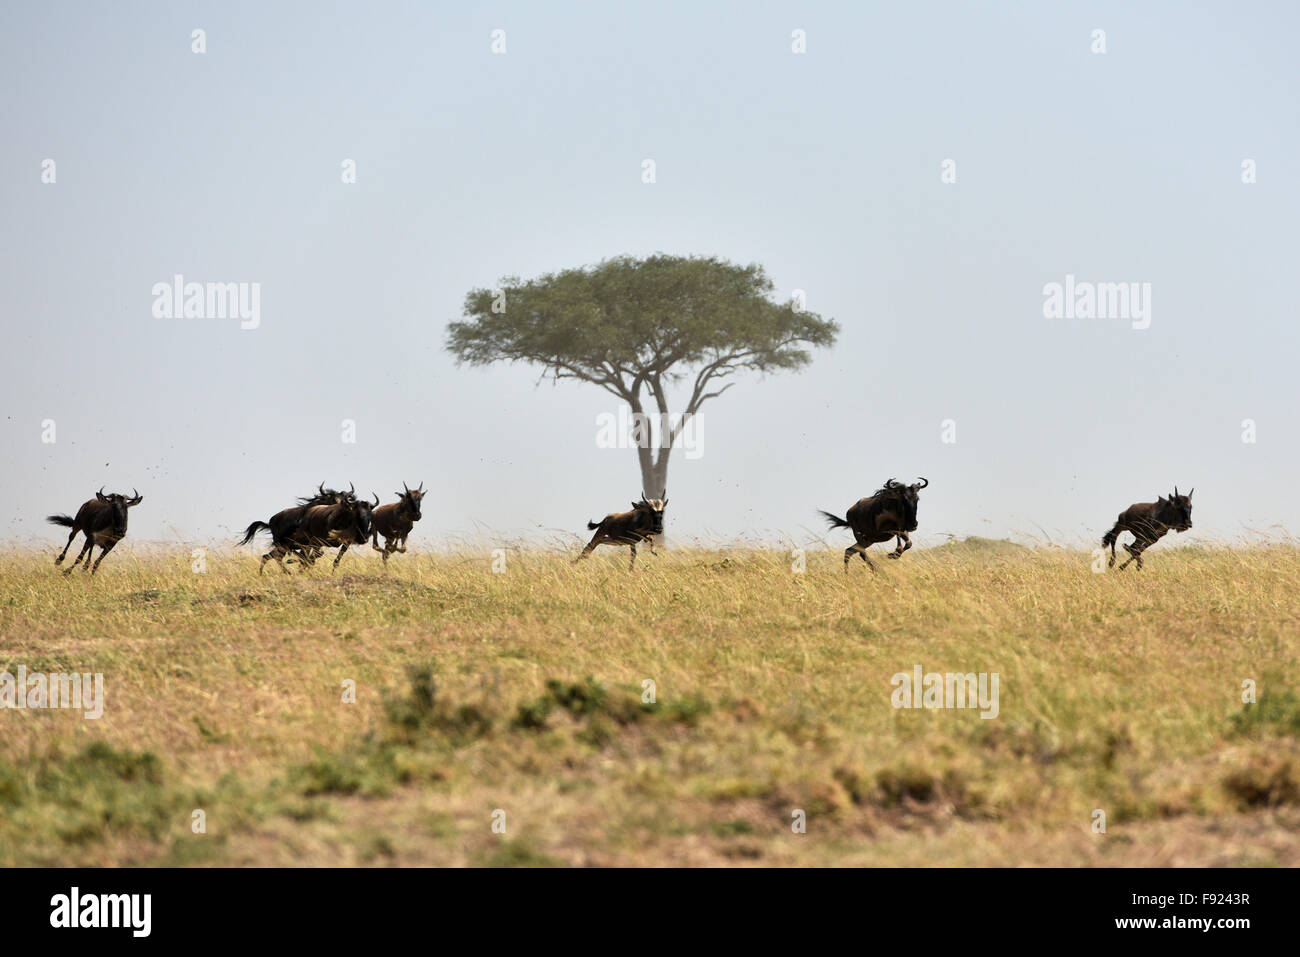 (151213) -- MASAI MARA, Dec. 13, 2015 (Xinhua) -- A herd of wildebeests chase each other on the savanna in Kenya's Masai Mara National Reserve, on Aug. 15, 2015. As a country Kenya has considerable land area devoted to wildlife habitats. The tropical wet and dry climate created a vast tropical savanna for Kenya and for the wildlife to thrill. In return, the great savanna and the diverse wildlife brought the country a worldwide reputation. Alone in Masai Mara National Reserve, there are approximately 95 mammal species and 450 bird species. All five of the 'Big Five' game animals of Africa, that Stock Photo